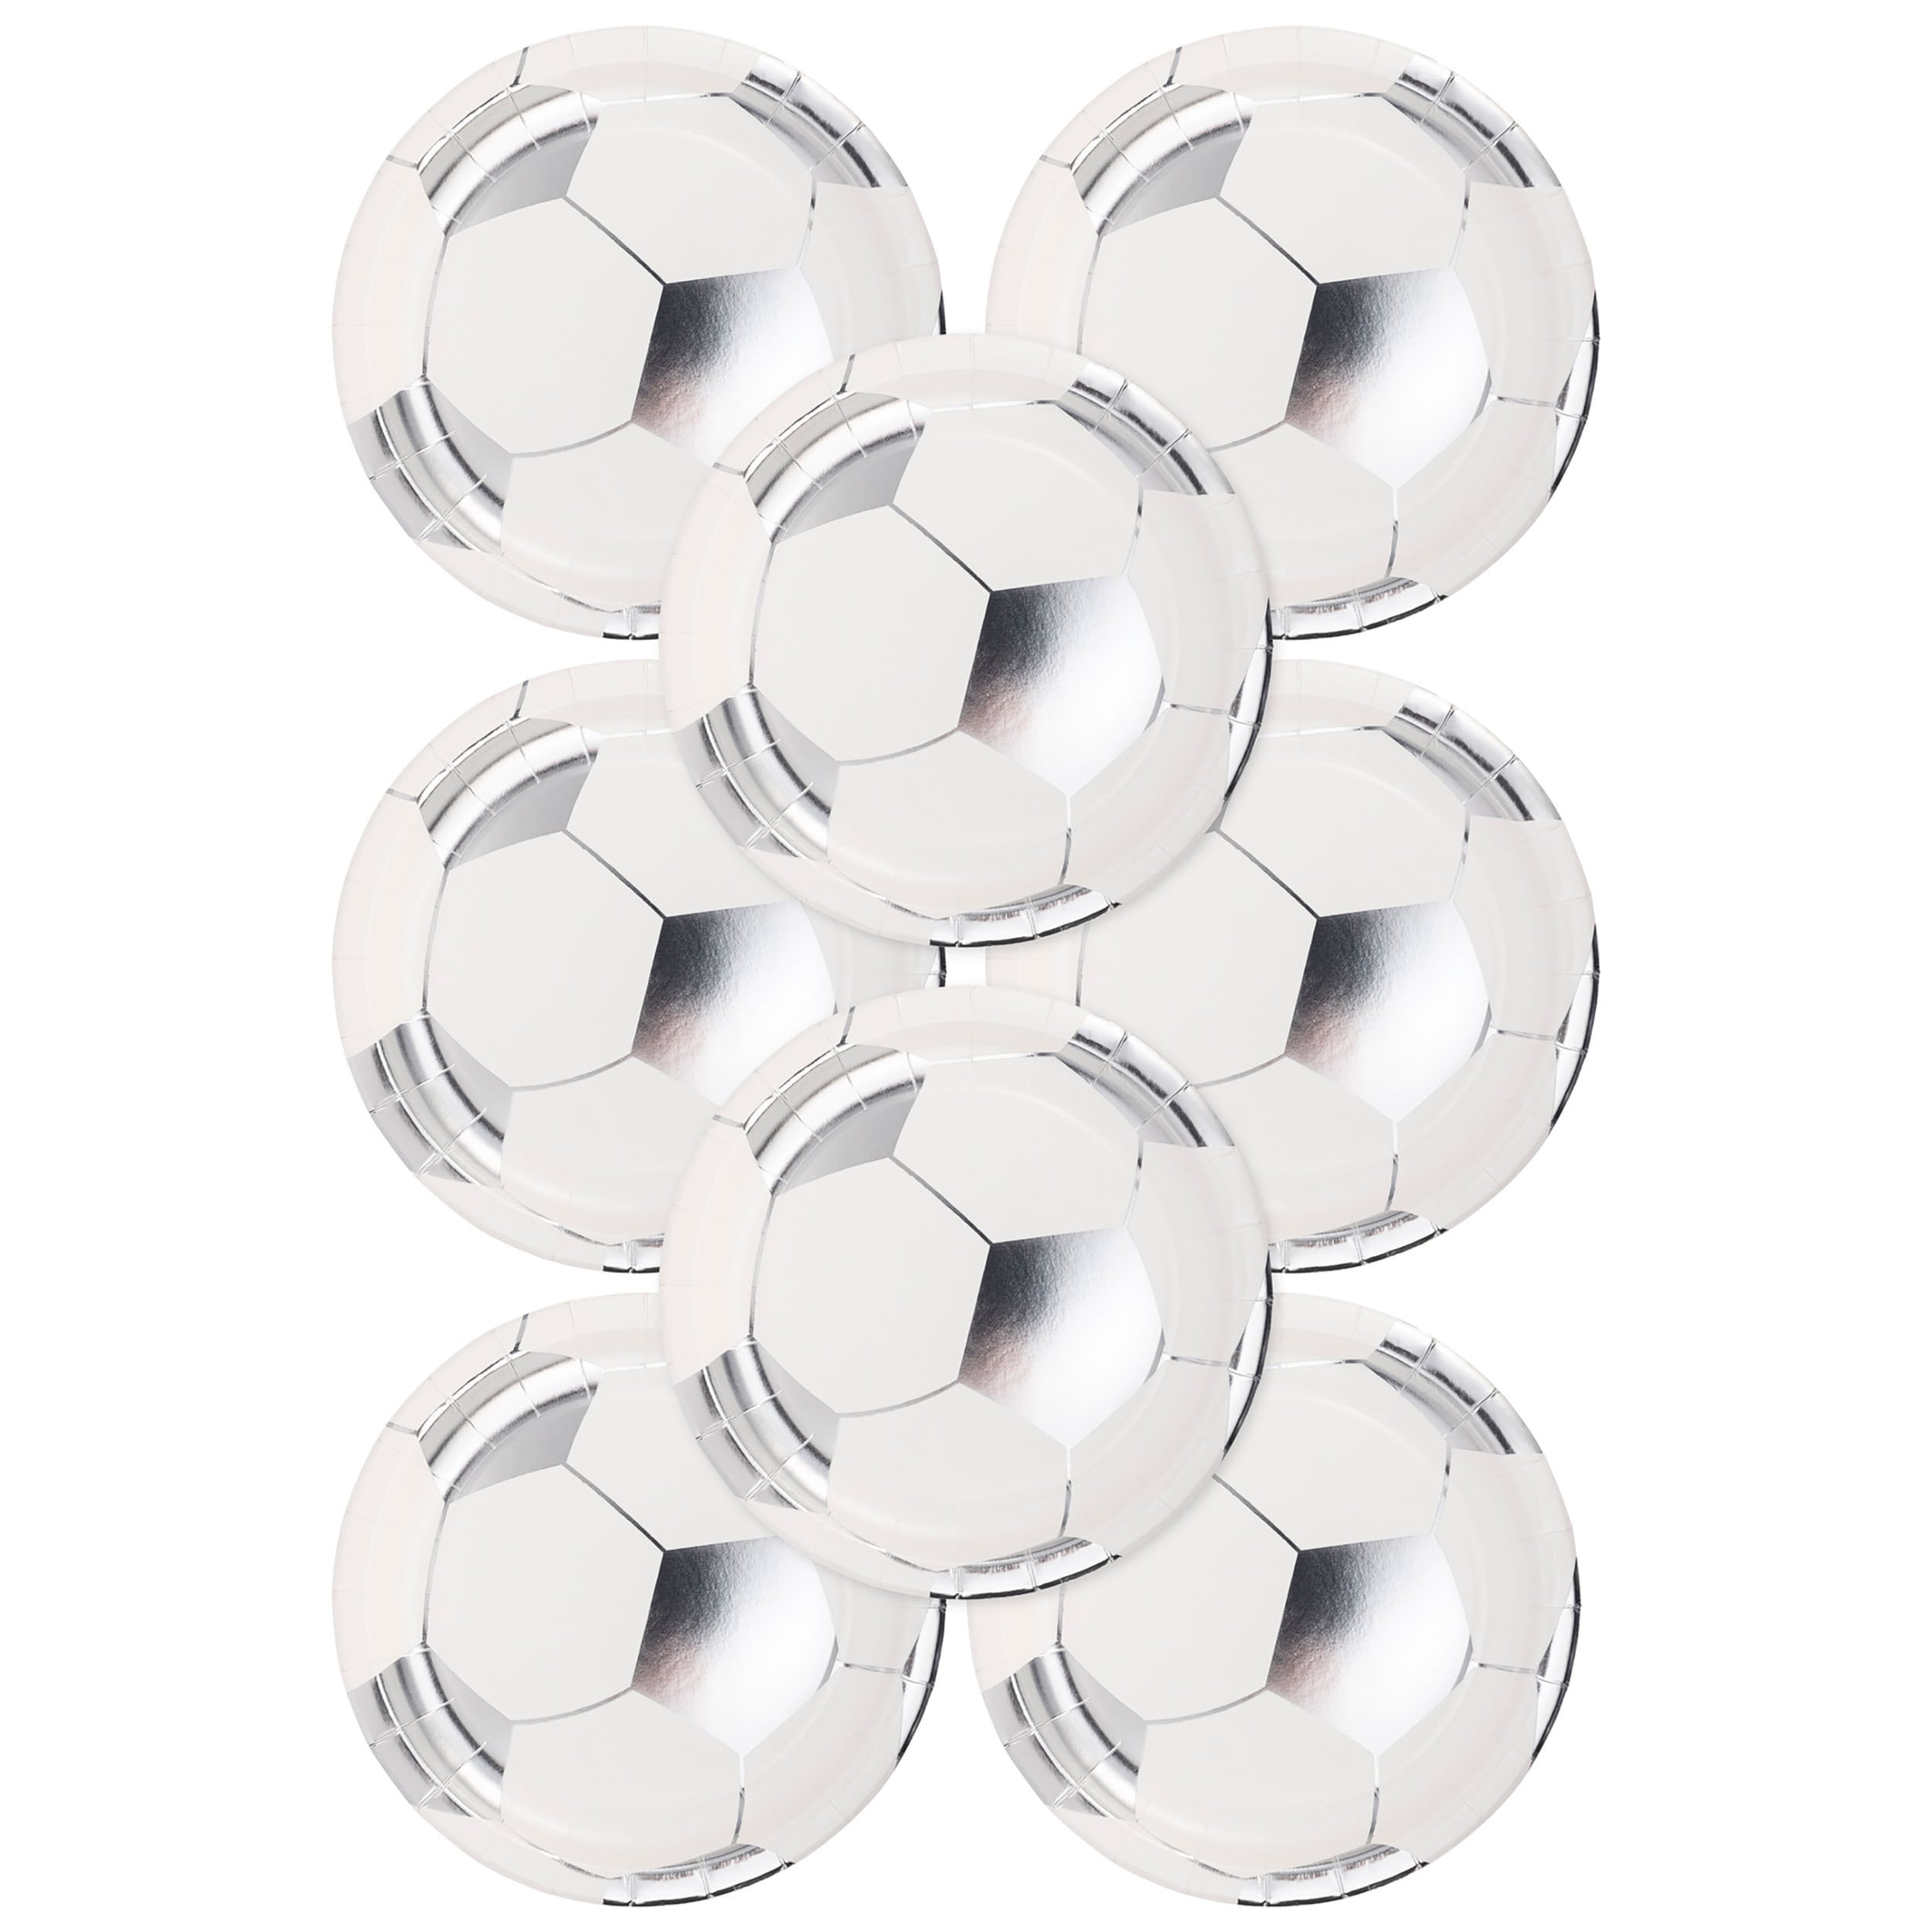 Soccer Party Plates - Small Round Party Plates accented in silver foil